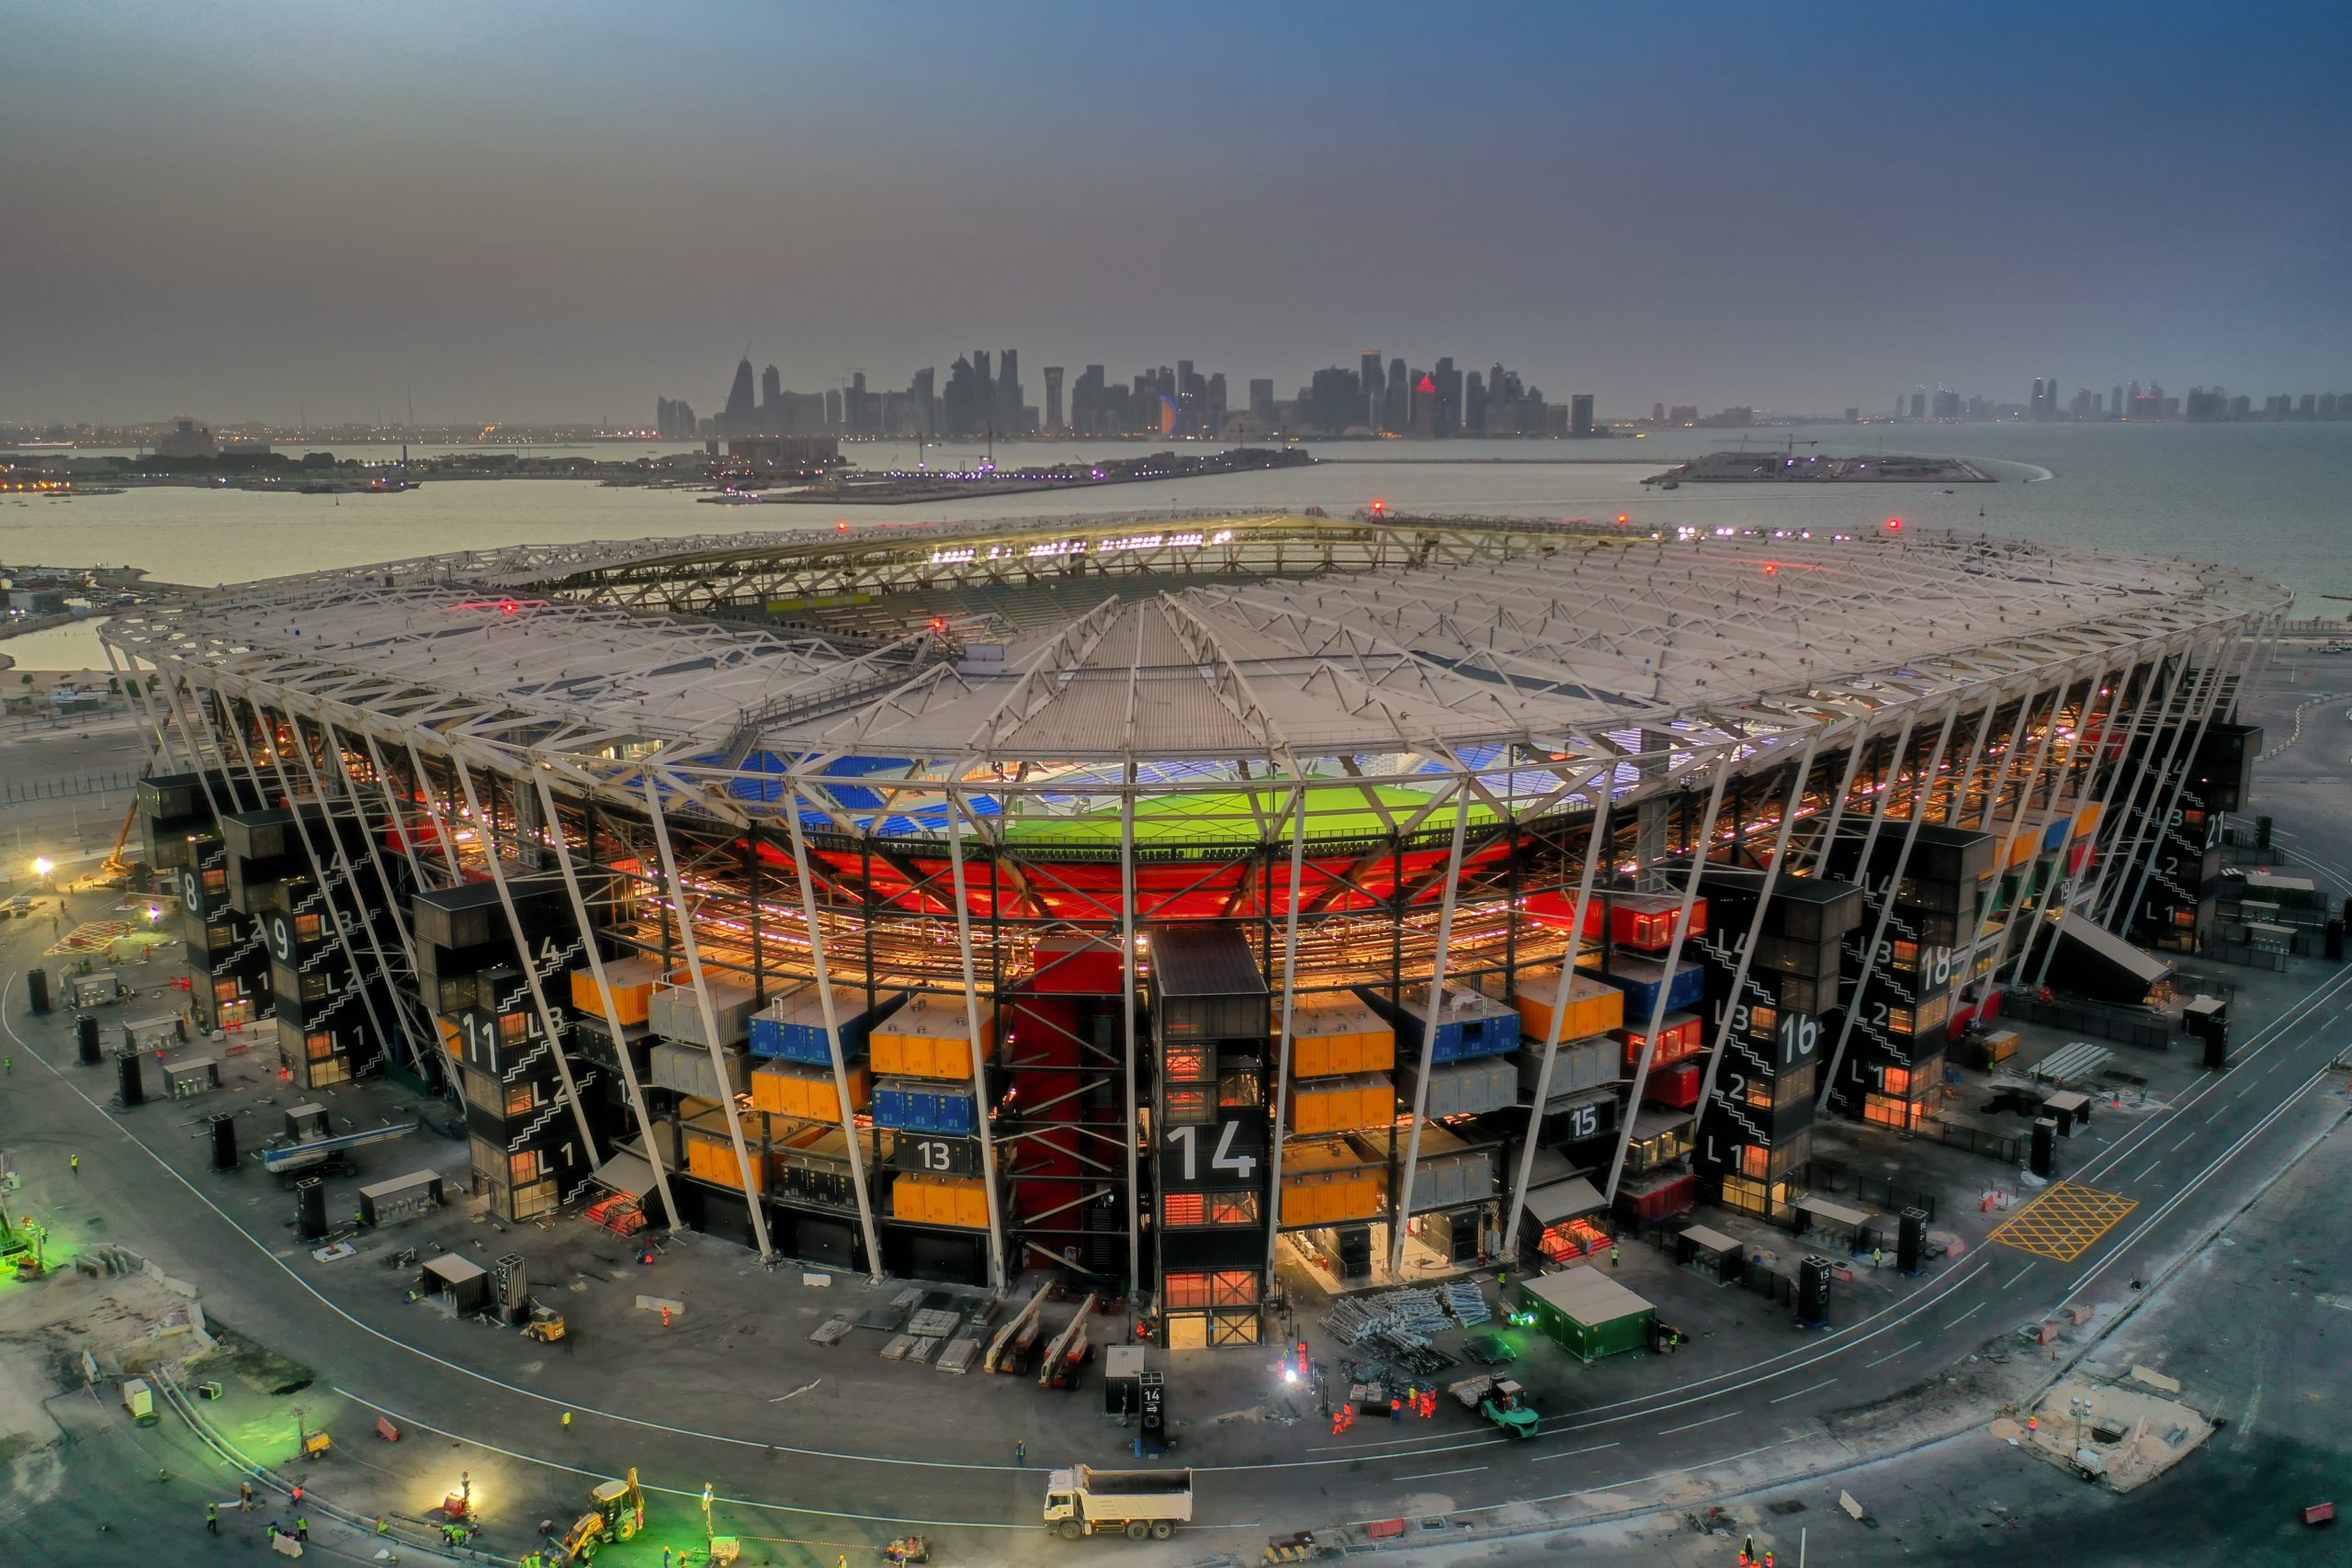 Qatar's 'carbon-neutral' World Cup raises doubts from climate experts